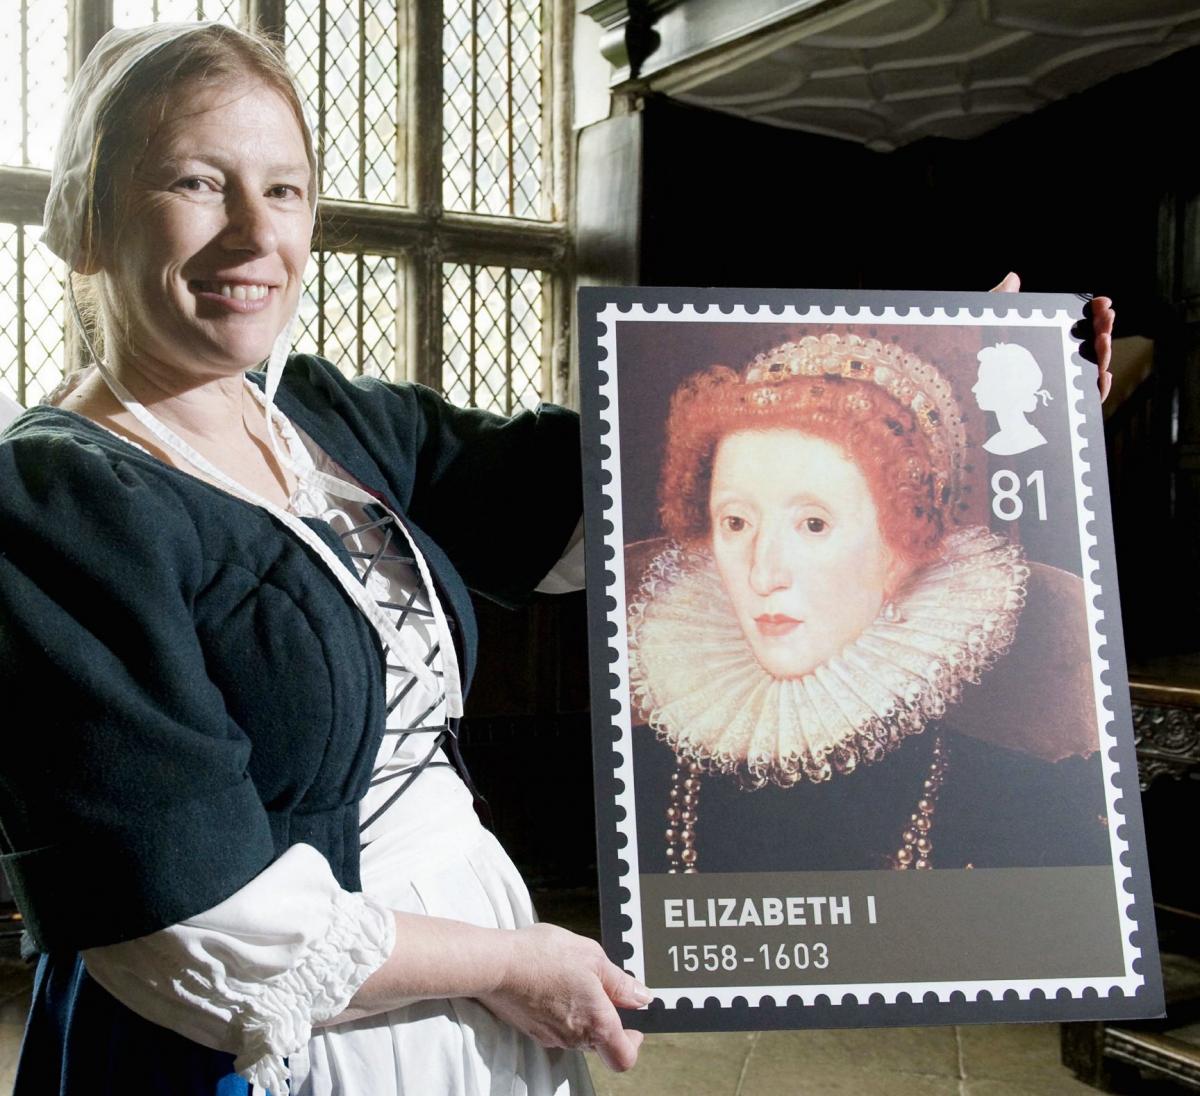 Oakwell Hall in Birstall was the setting as the Royal Mail unveiled the second series of its Kings and Queens stamps celebrating the royal houses of England. 